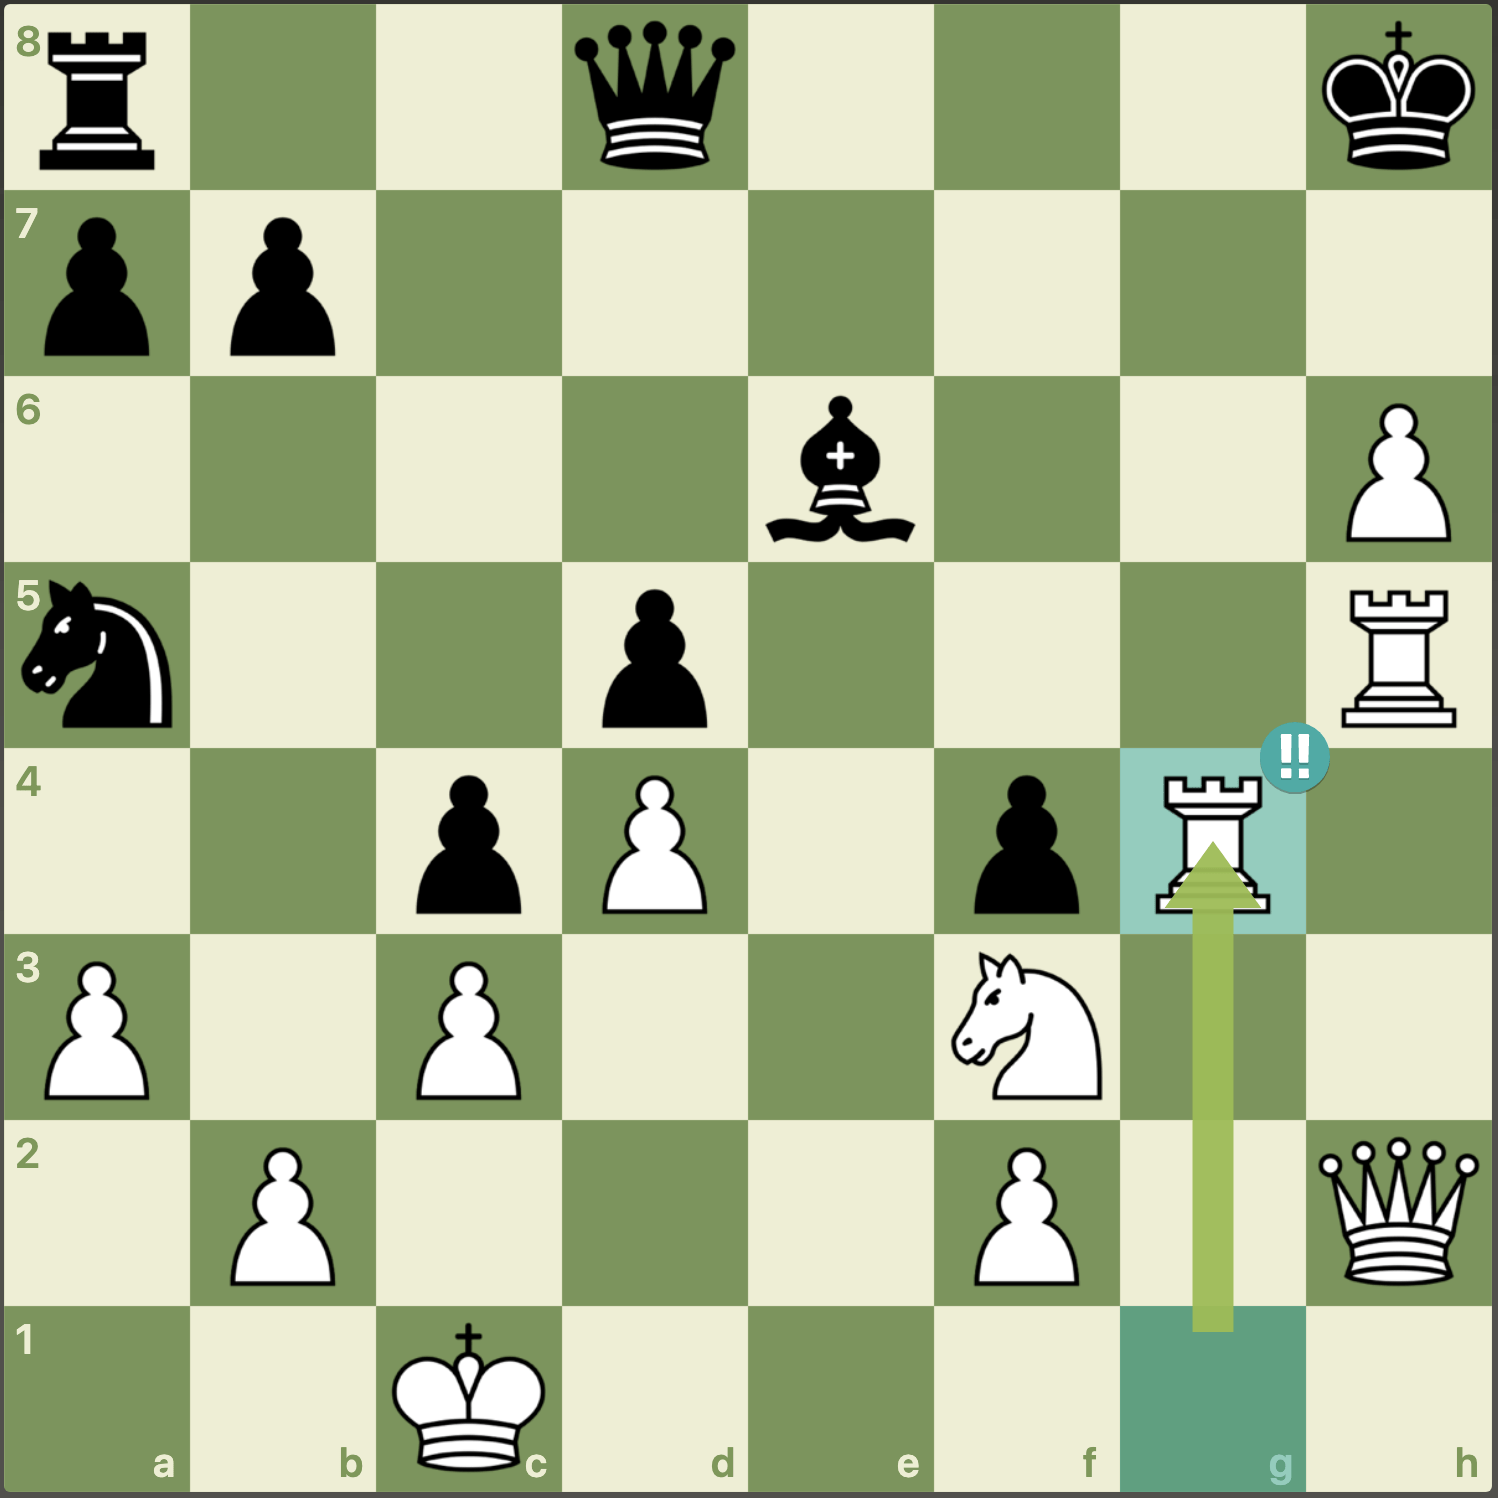 This Chess Move By Stockfish Was GENIUS 